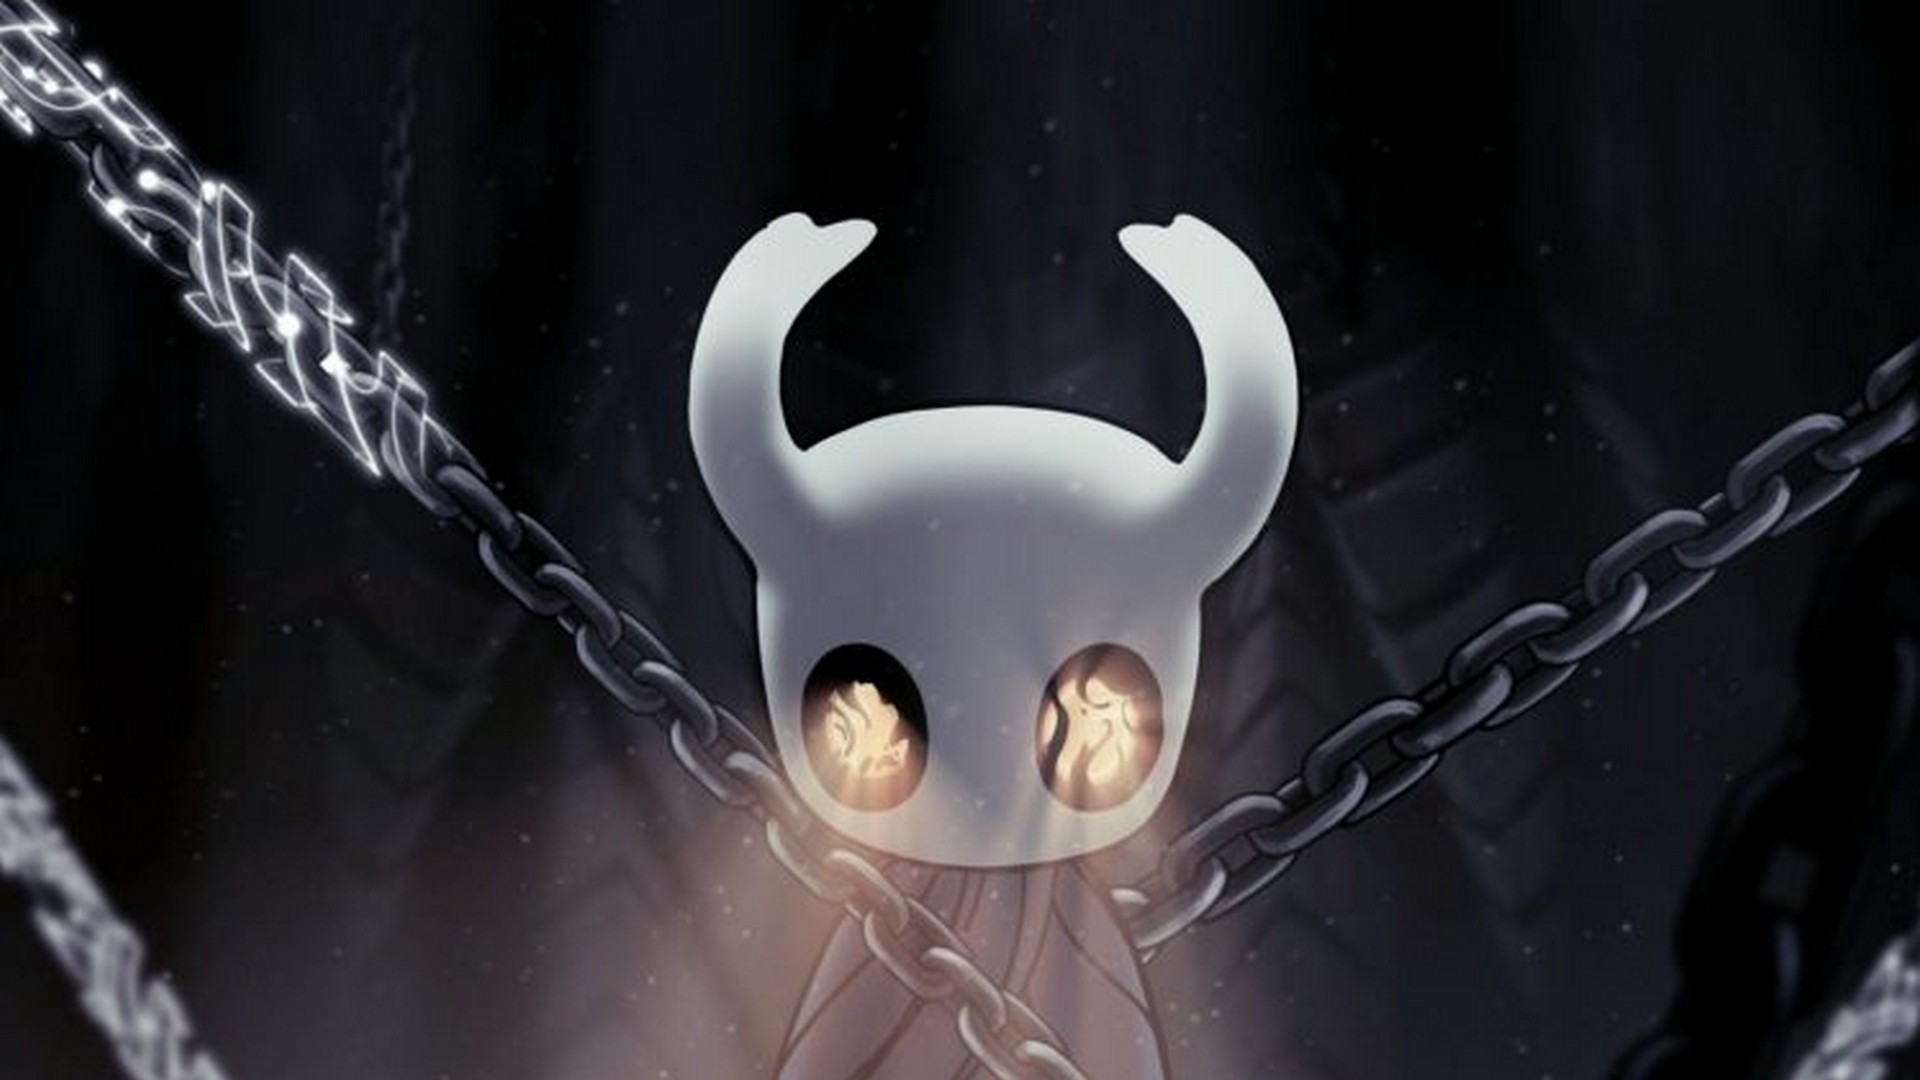 Hollow Knight Gameplay Desktop Backgrounds HD With high-resolution 1920X1080 pixel. You can use this wallpaper for your Windows and Mac OS computers as well as your Android and iPhone smartphones